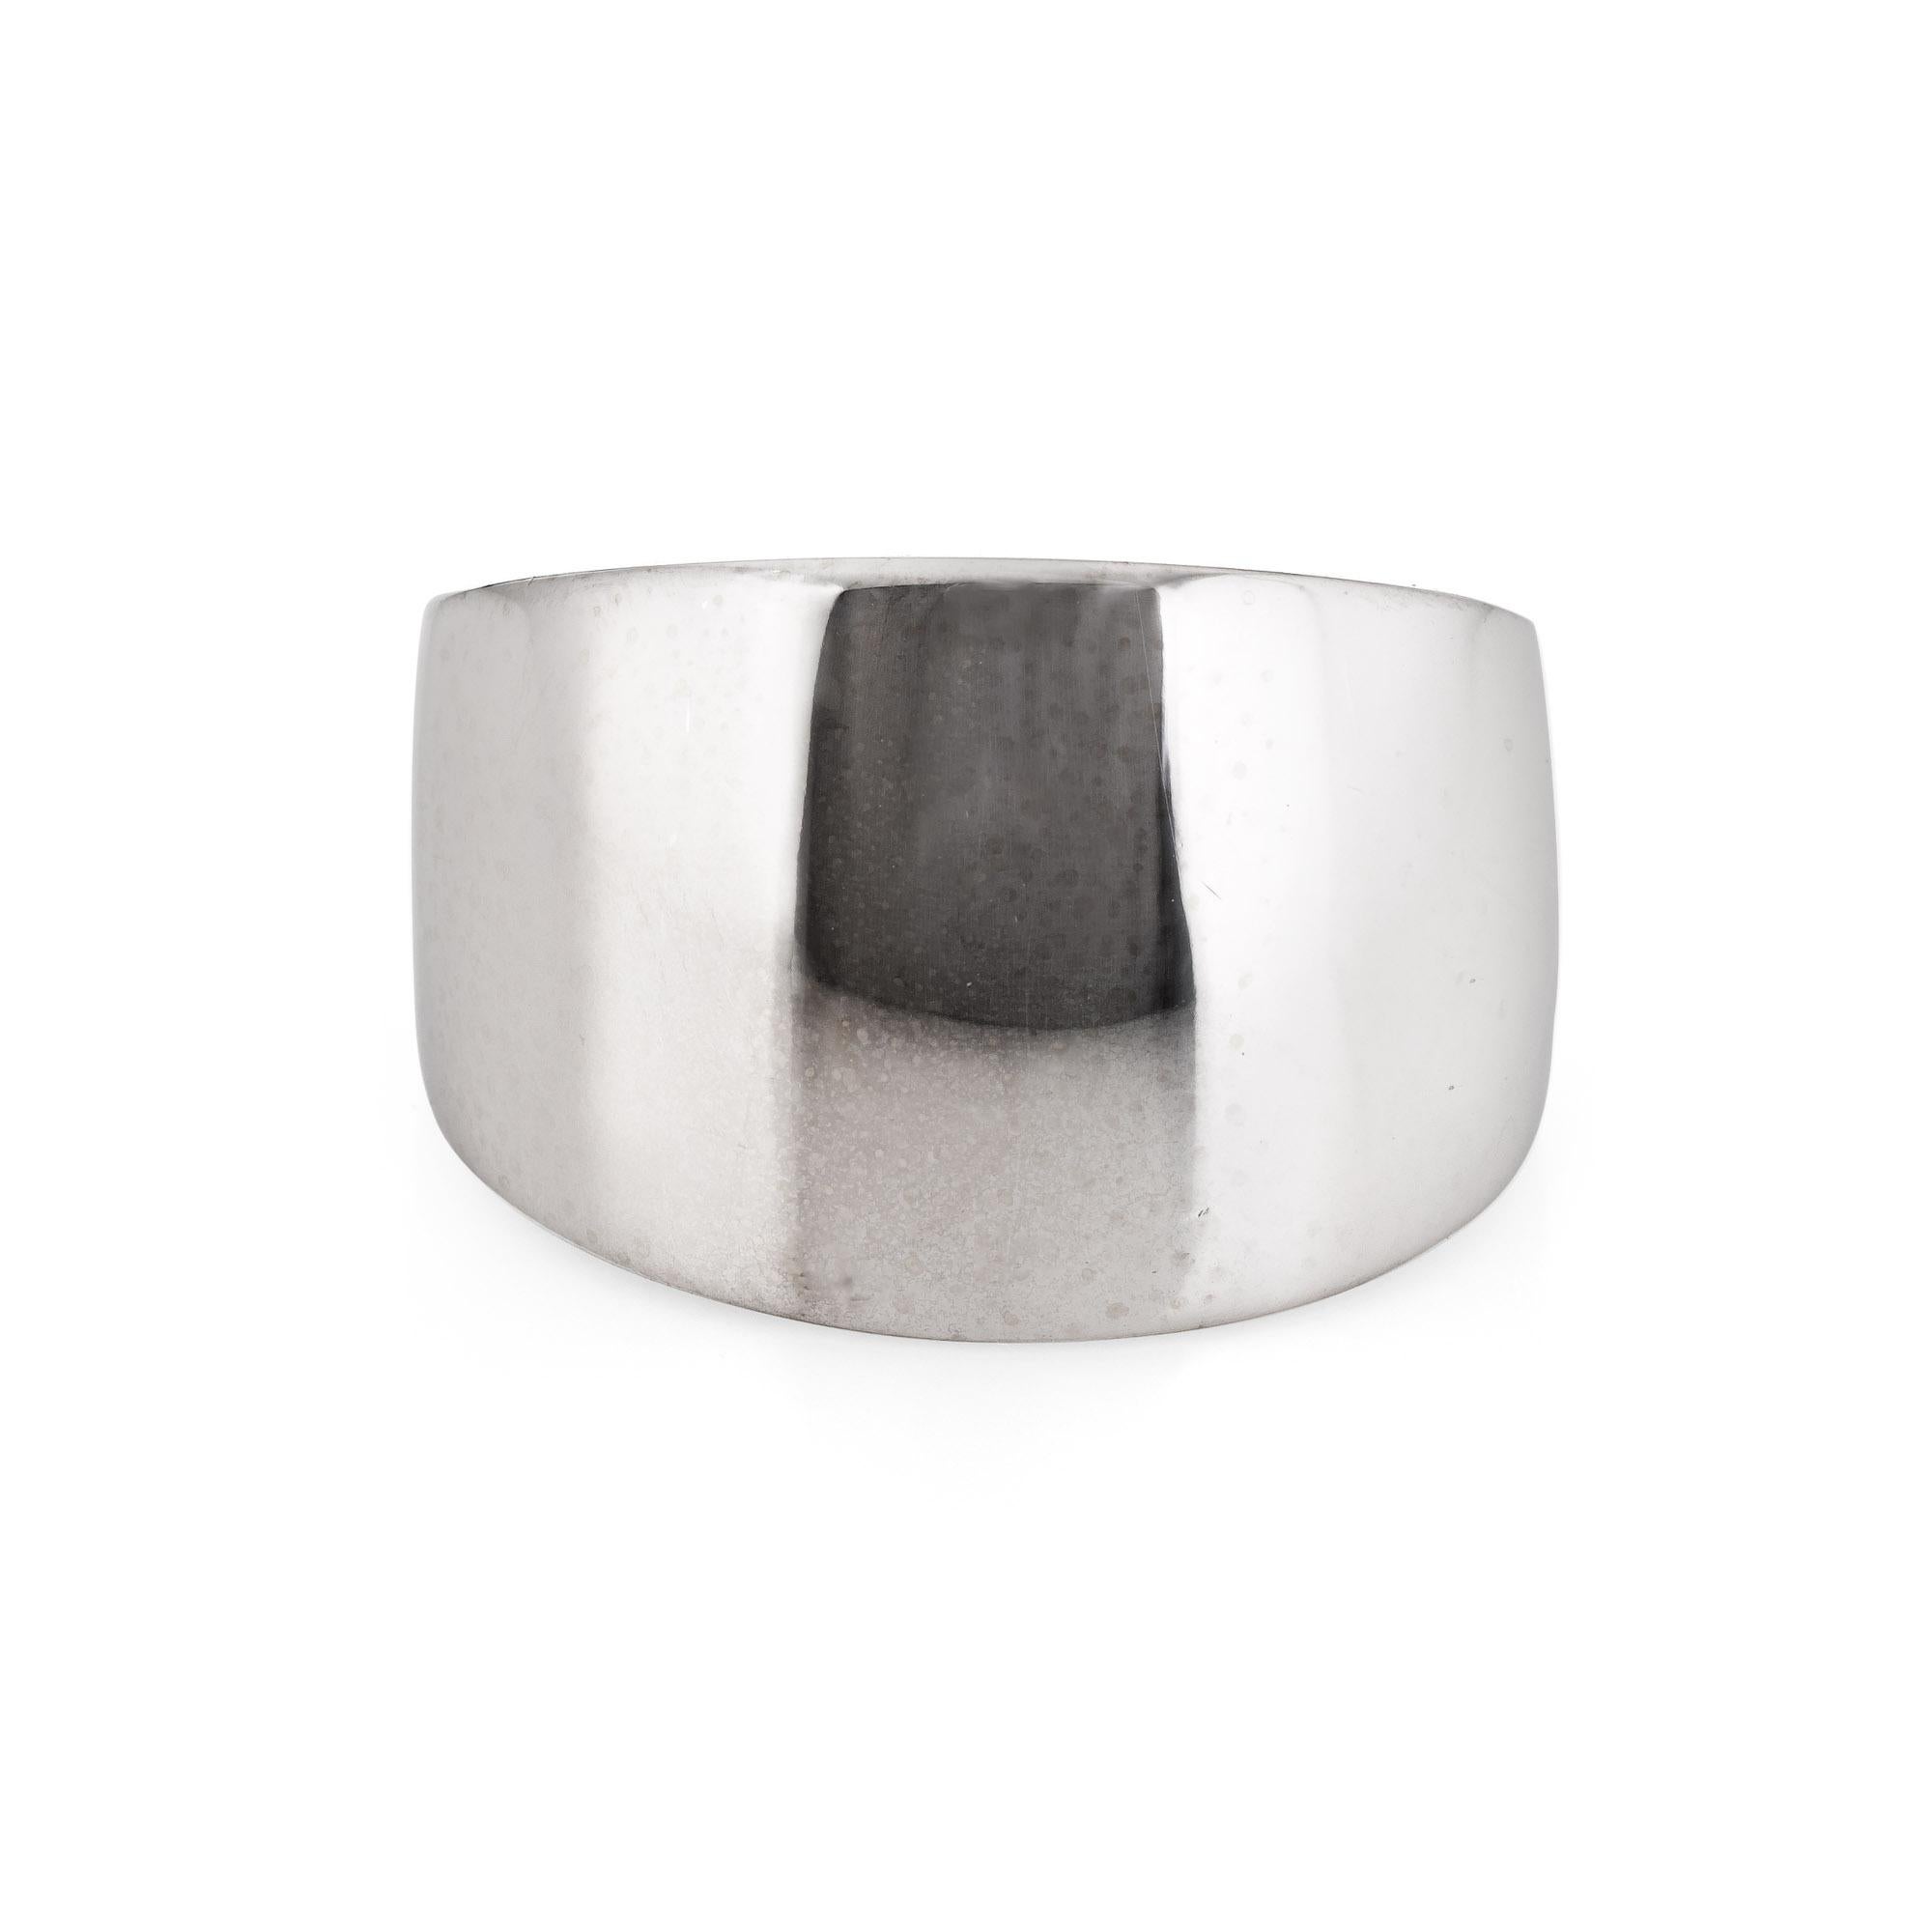 Stylish vintage wide band cigar ring crafted in 14 karat white gold. 

The band measures a wide 15mm (0.59 inches) and sits flat on the finger (rises 3mm from the finger). The ring is impactful in design and ideal worn day or night. 

The ring is in